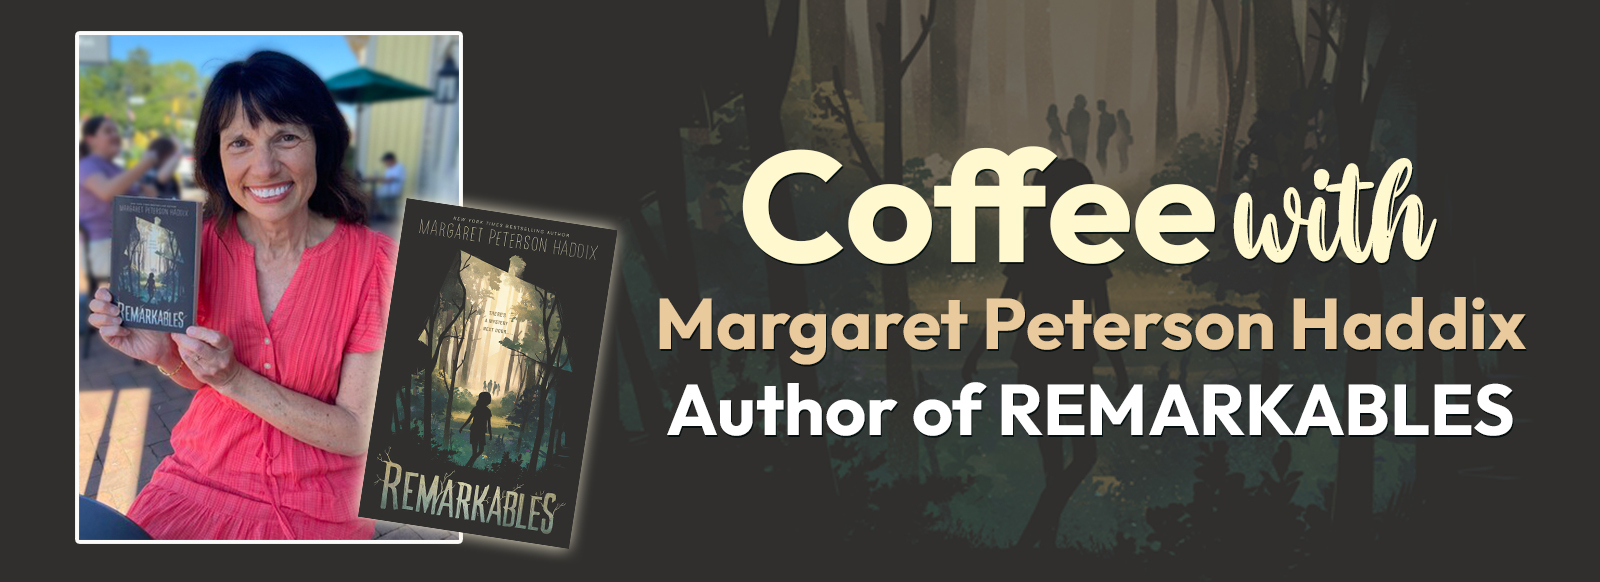 Coffee with Margaret Peterson Haddix